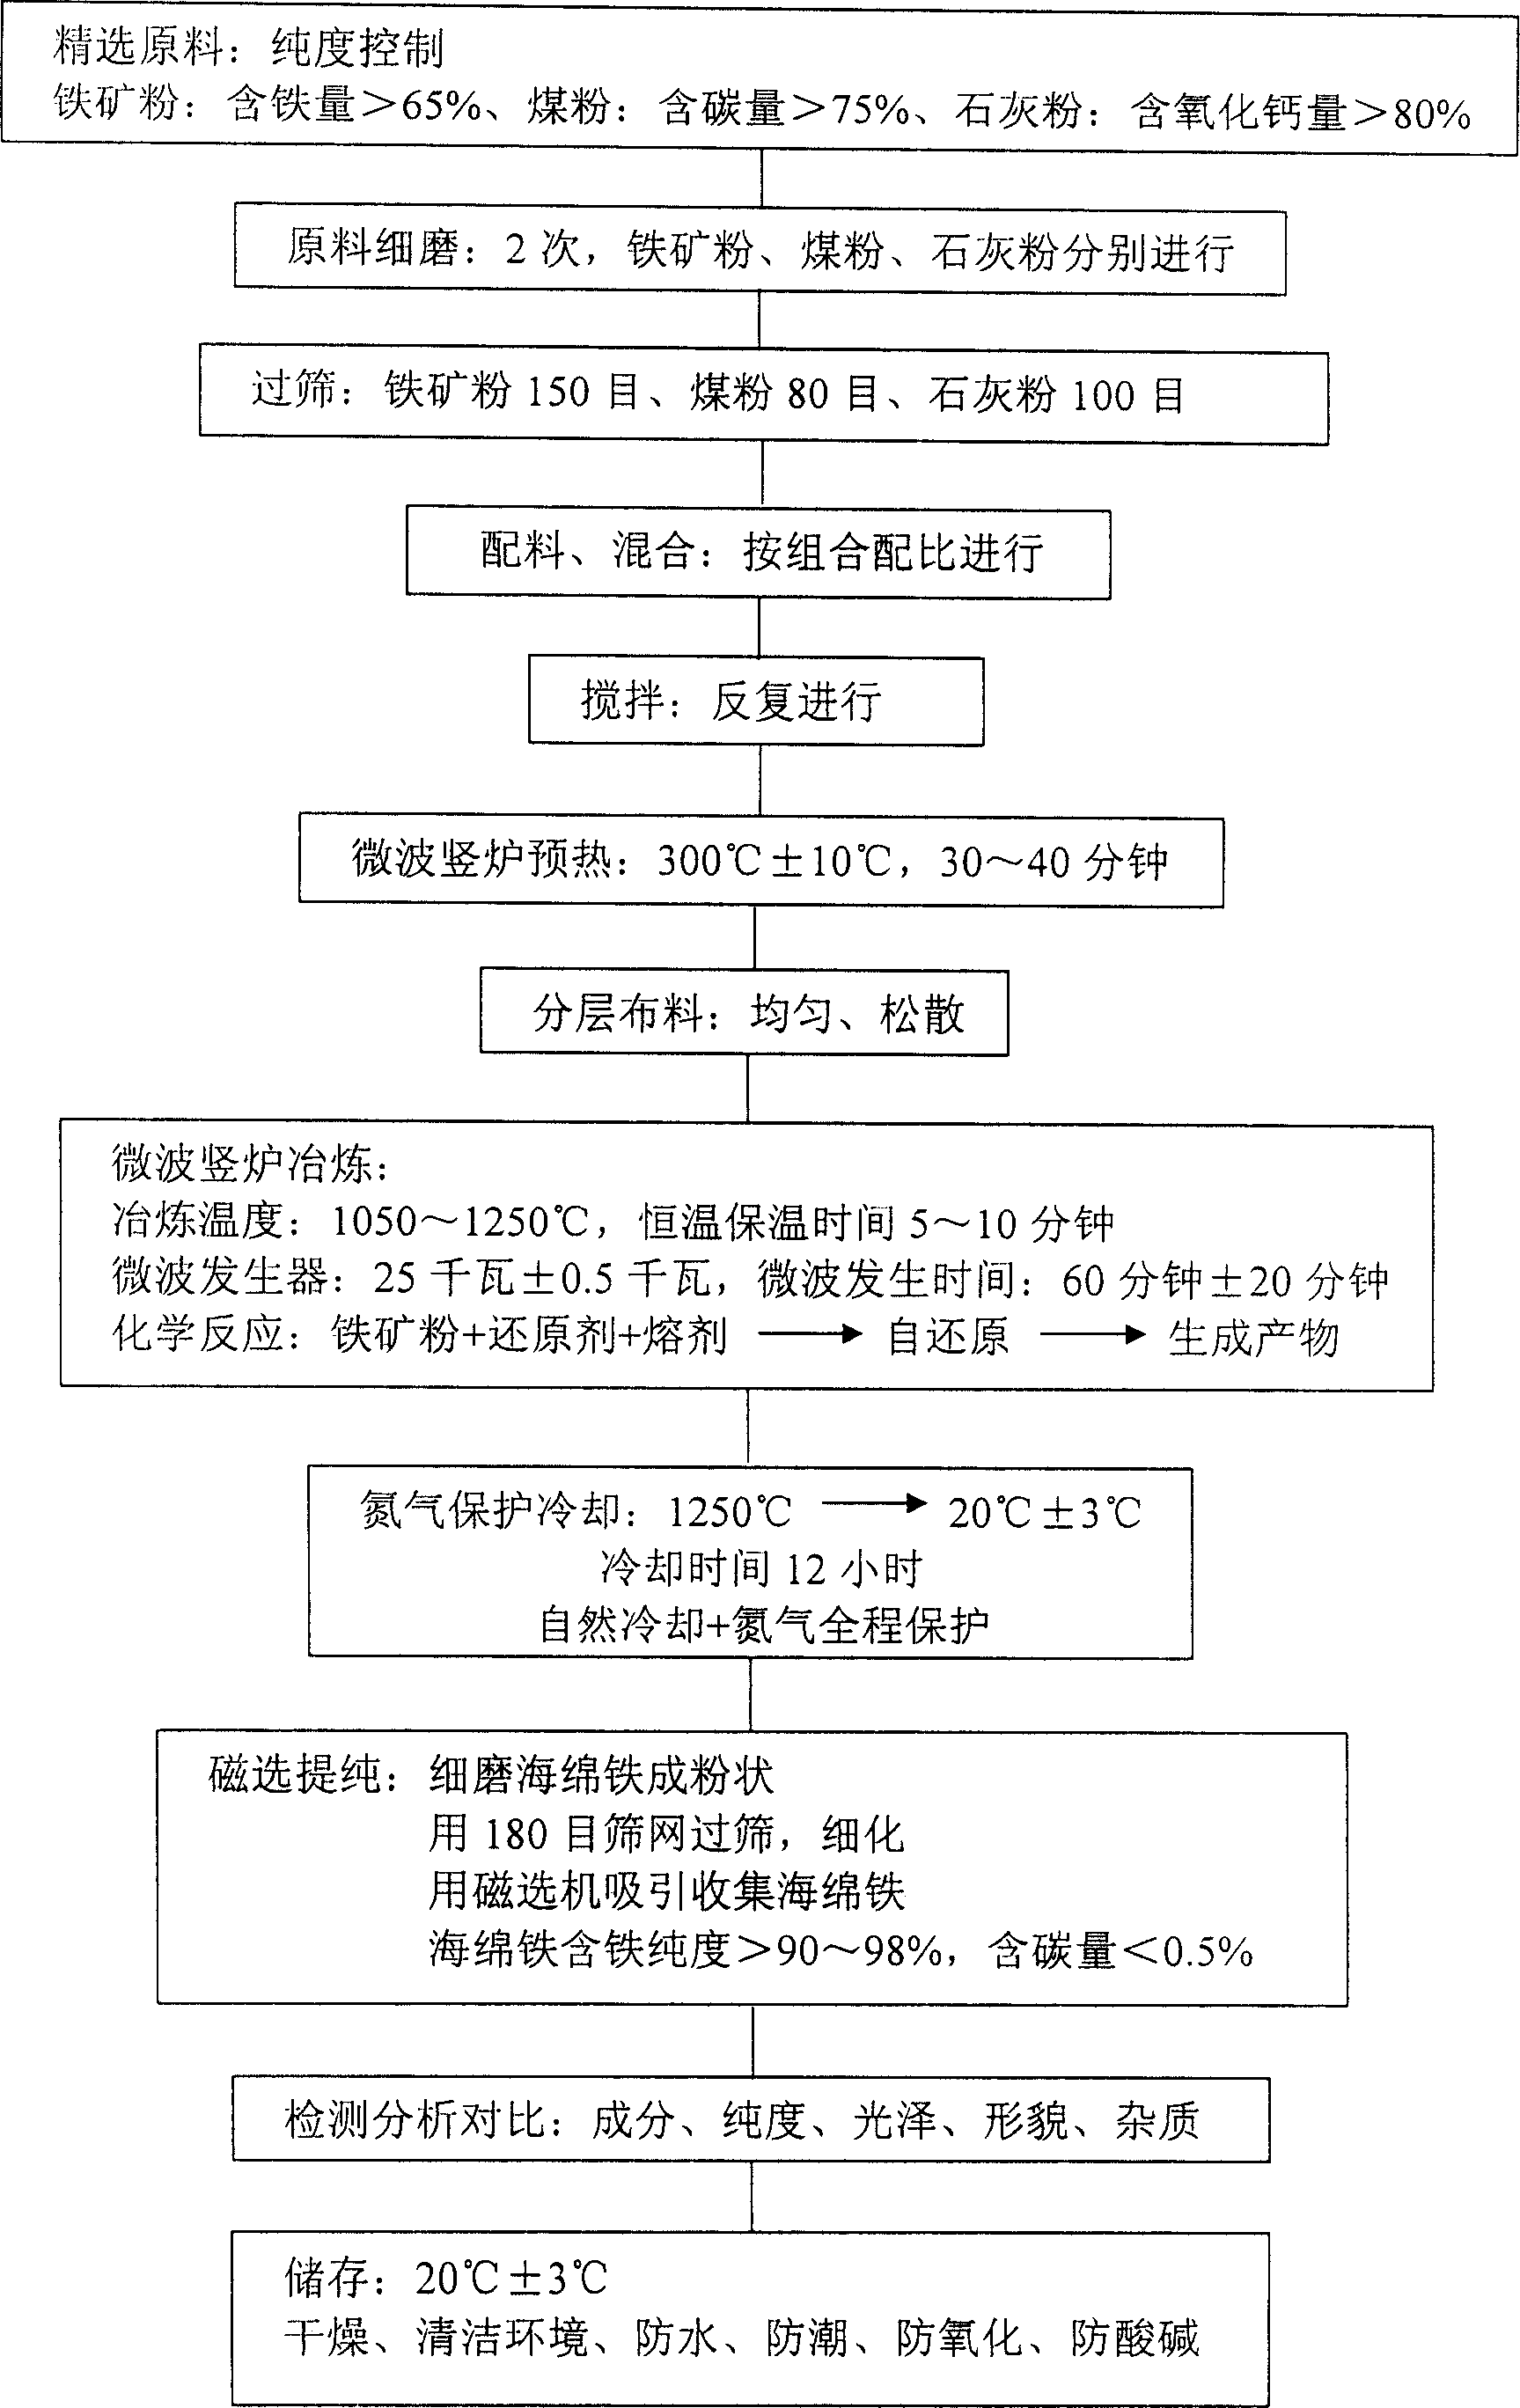 Method of manufacturing low carbon sponge iron using microwave vertical furnace